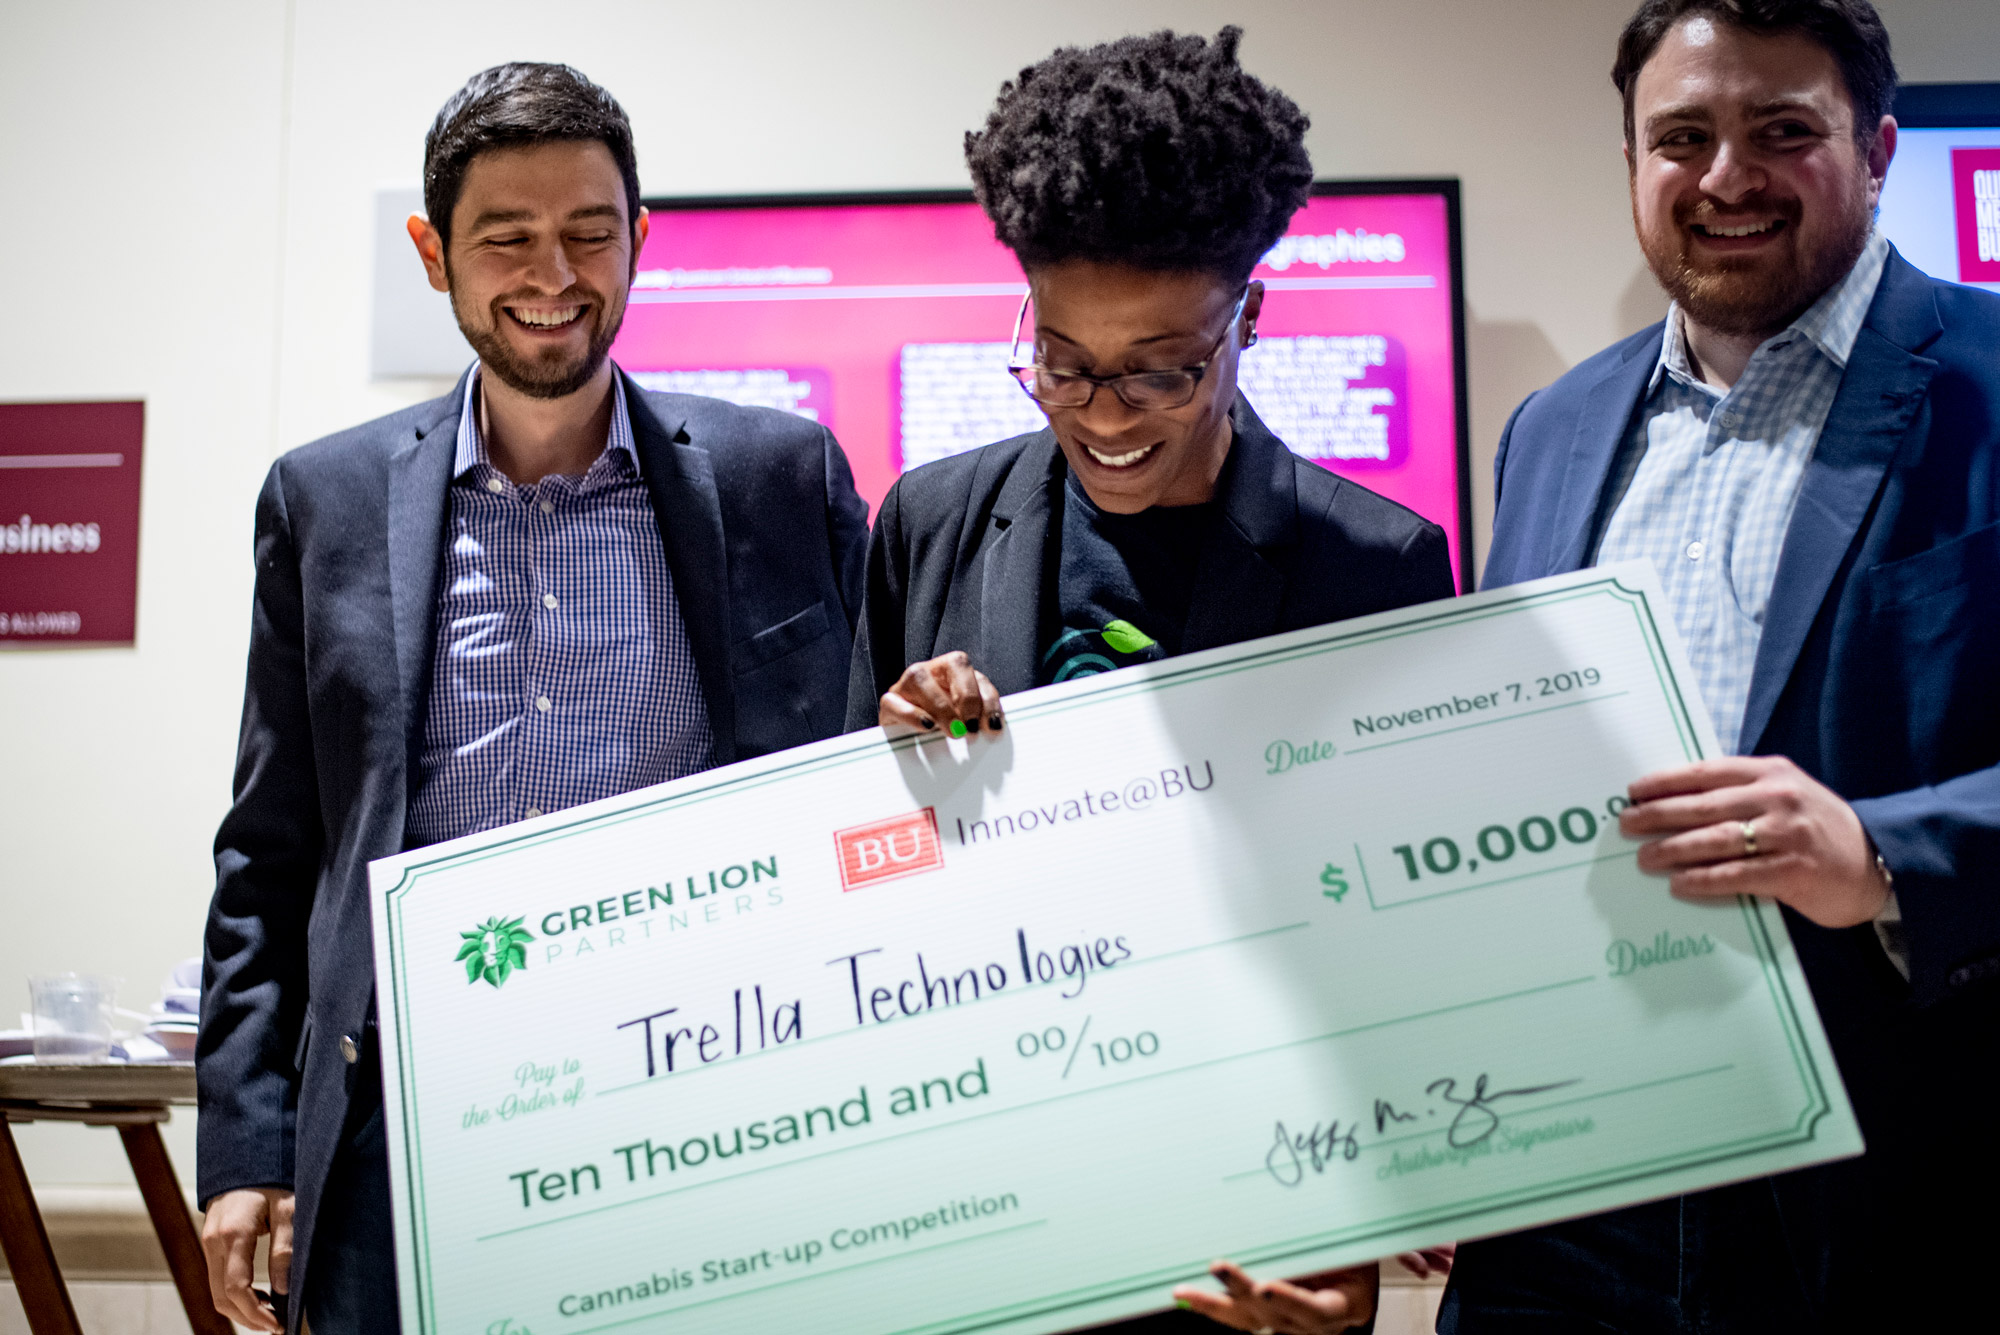 Angela Pitter (ENG'86) receives a check for $10,000 for her pitch for Trella Technologies, a horizontal plant-training system, during the 3rd Annual Cannabis Startup Competition